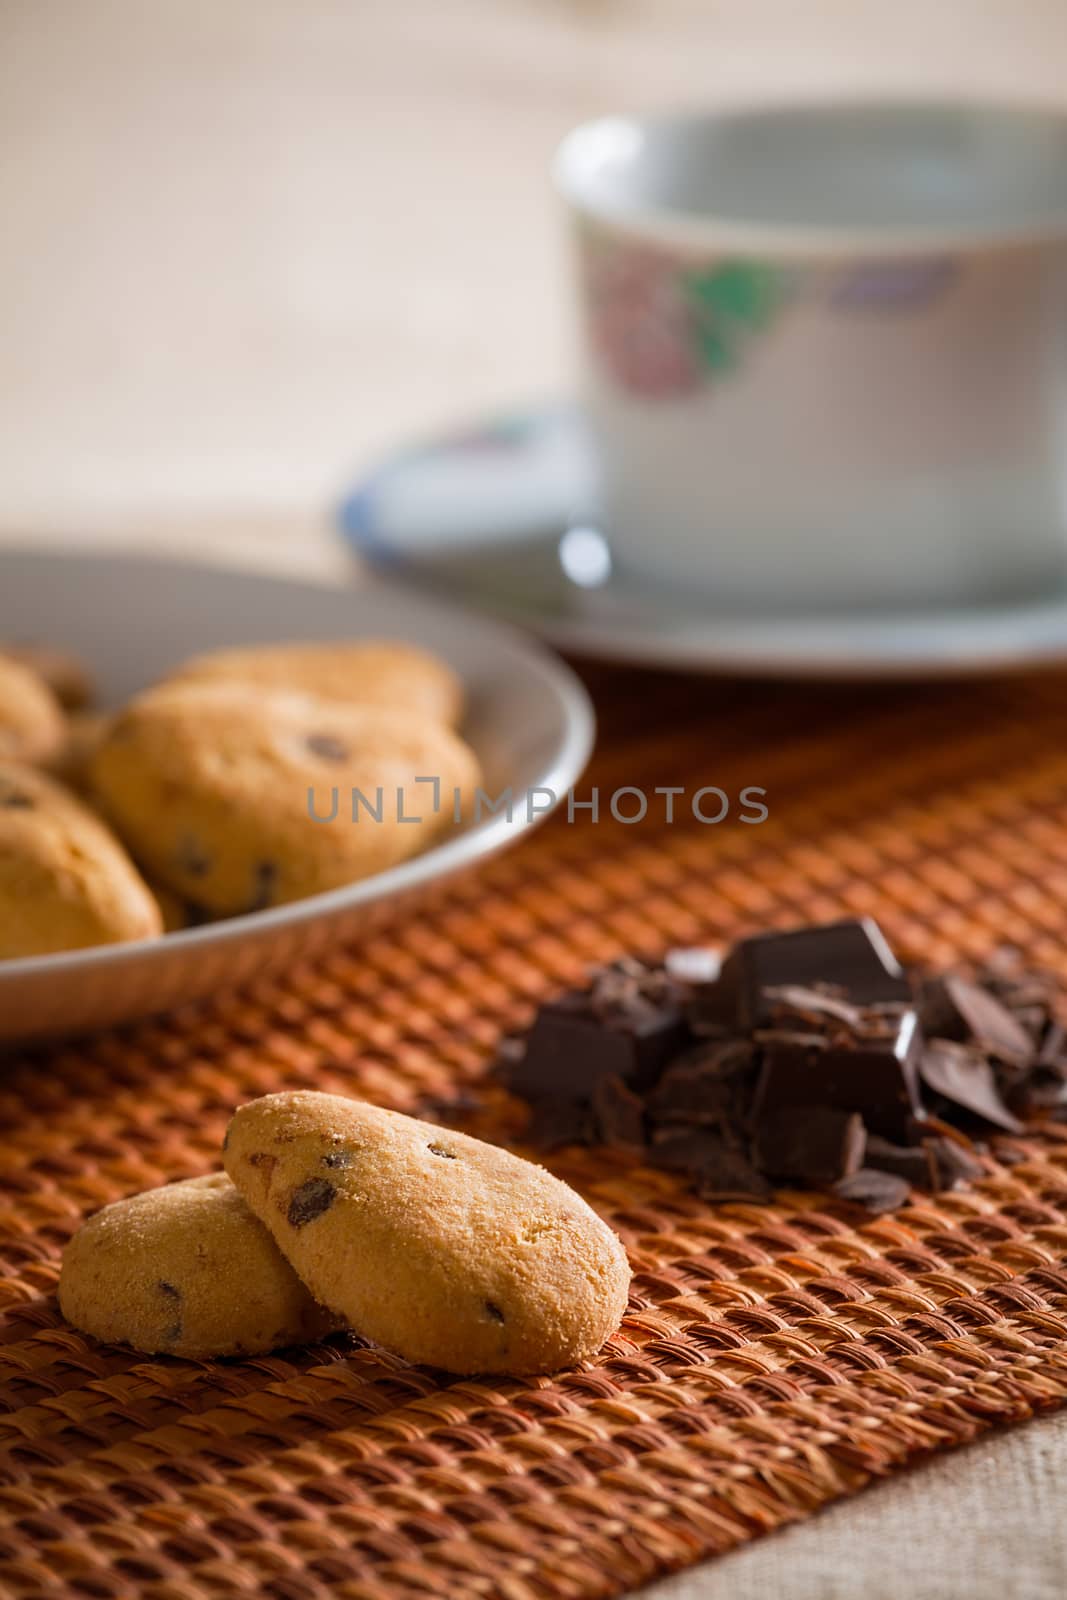 Cookies with chocolate chips on a tablecloth by LuigiMorbidelli